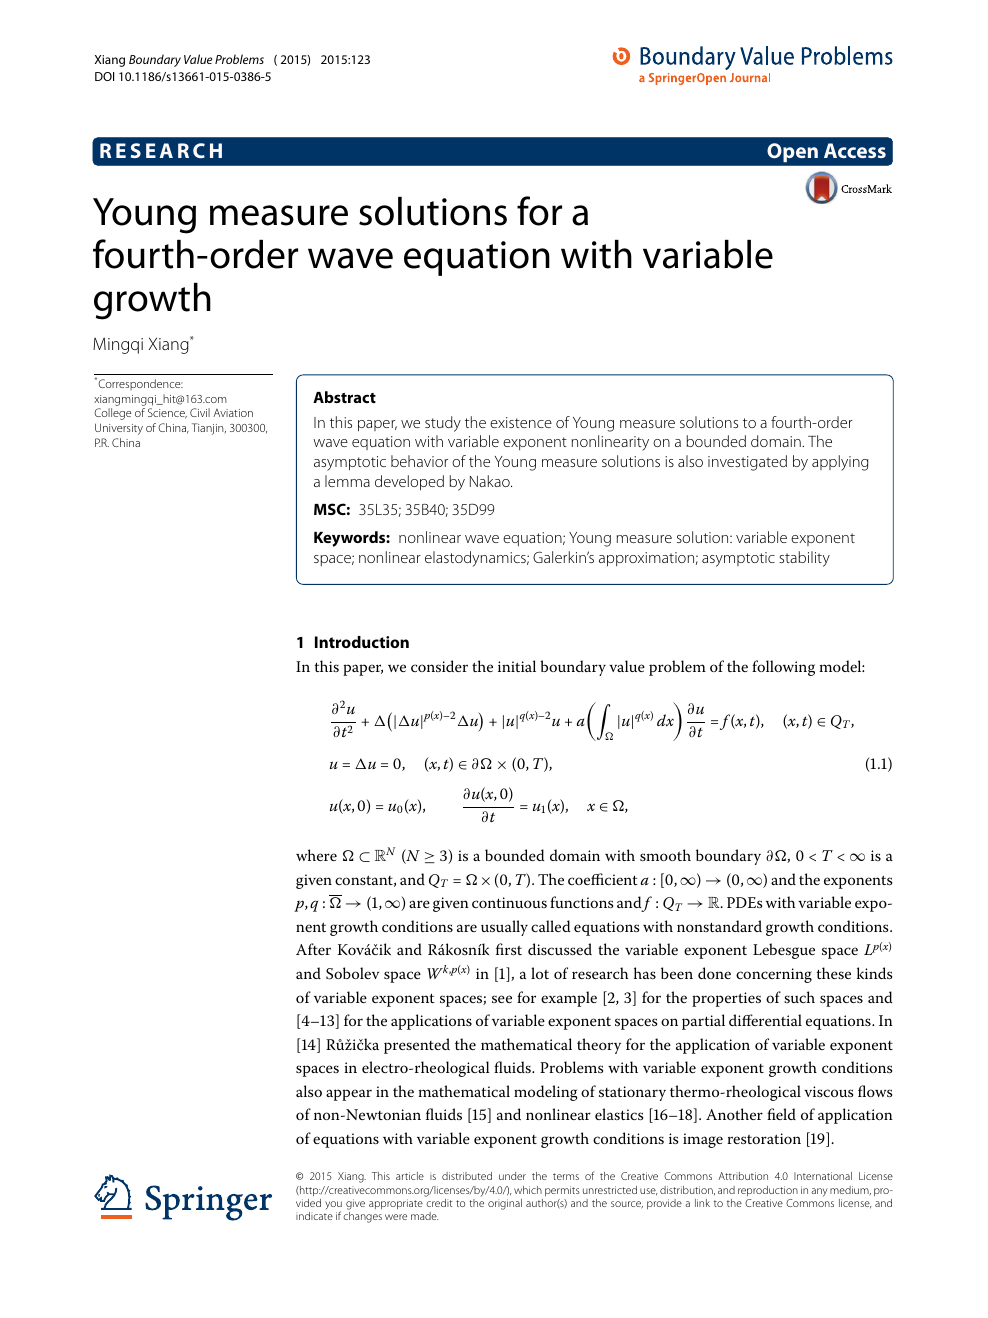 Young Measure Solutions For A Fourth Order Wave Equation With Variable Growth Topic Of Research Paper In Mathematics Download Scholarly Article Pdf And Read For Free On Cyberleninka Open Science Hub